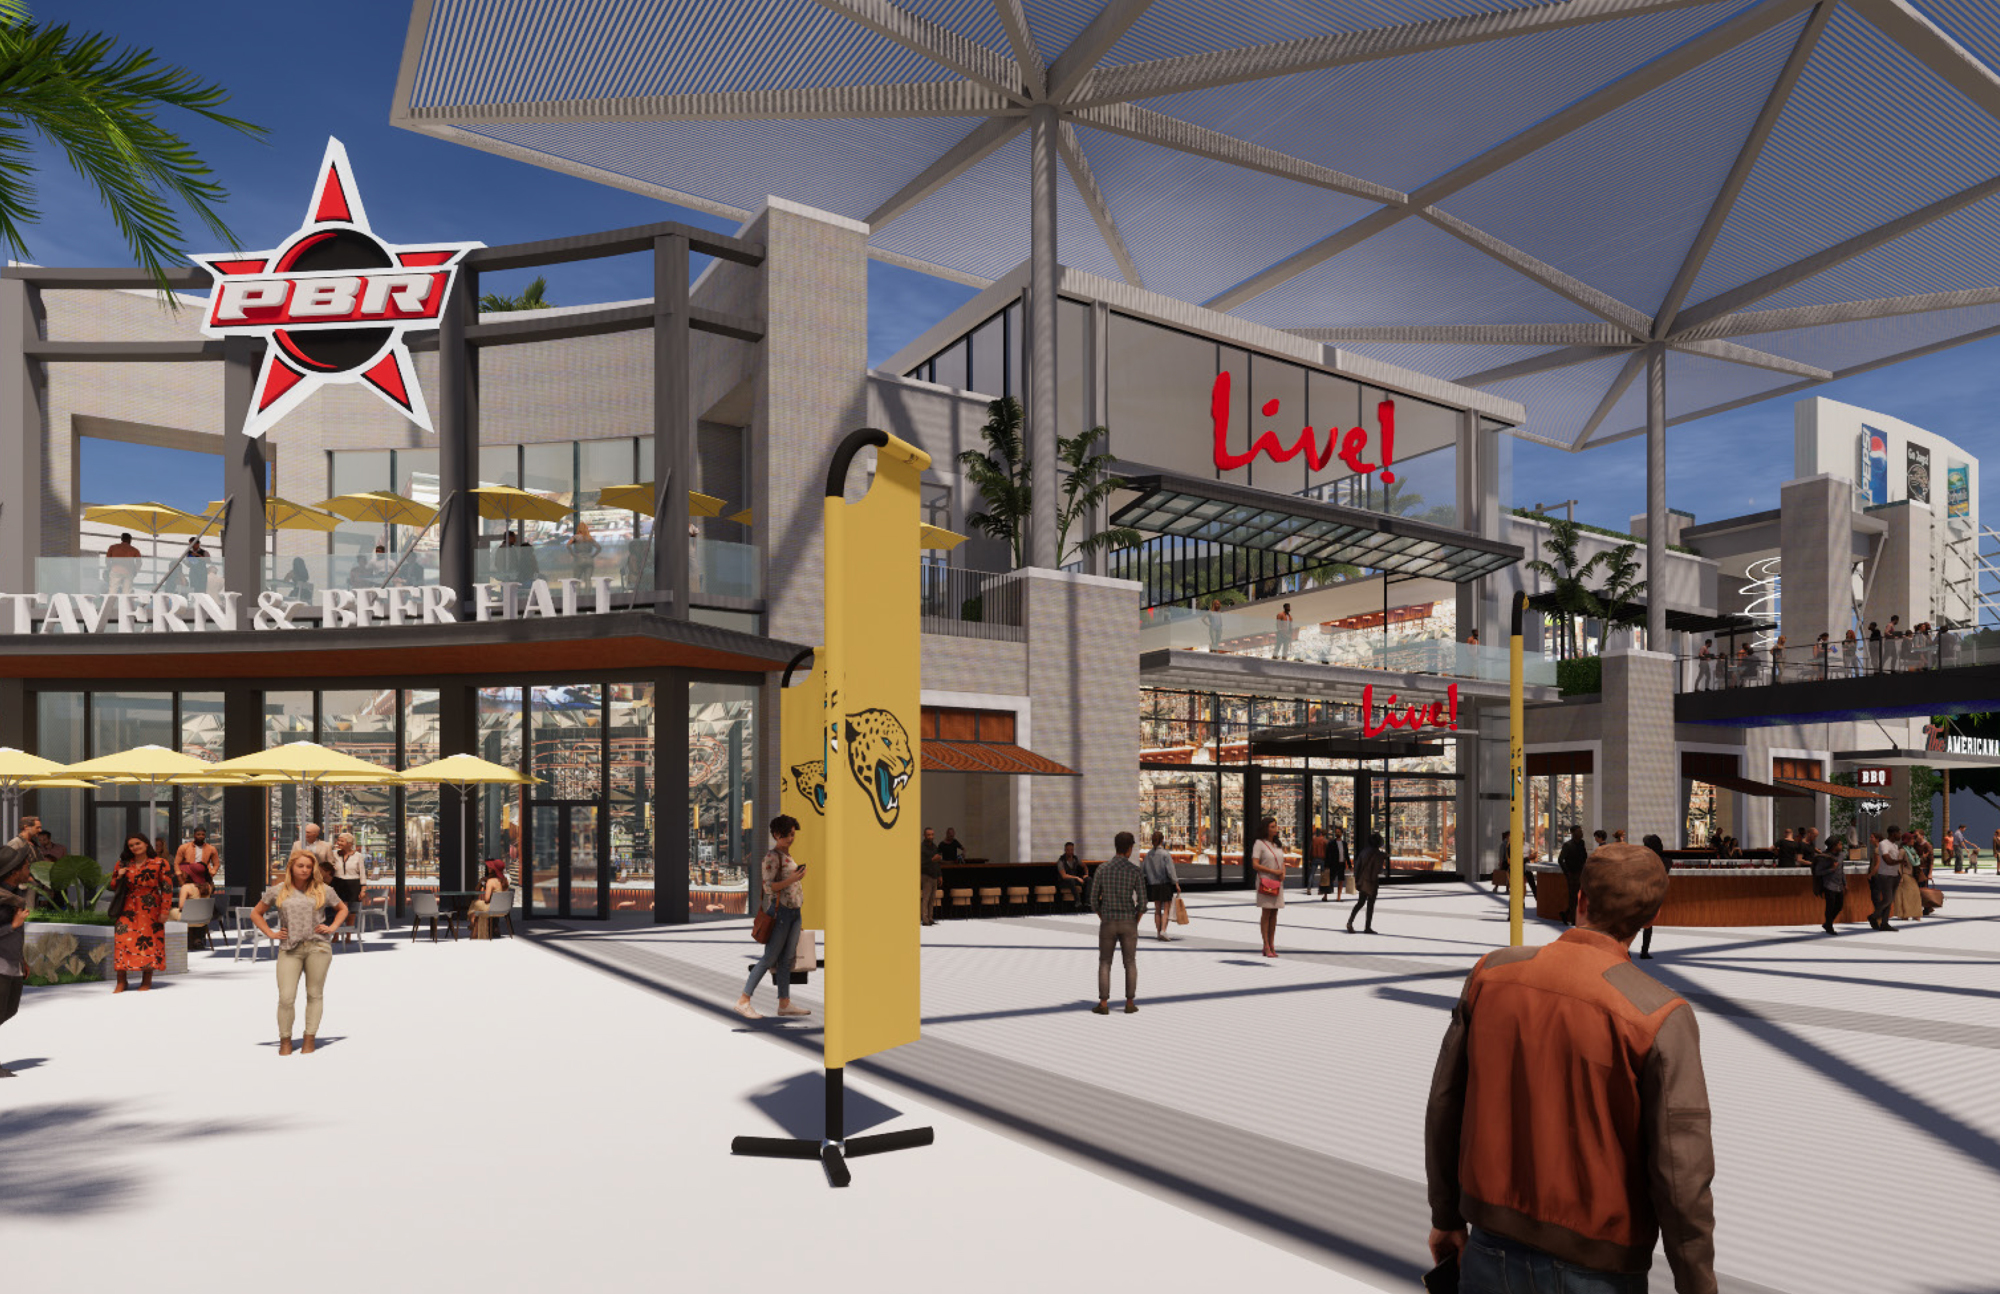 Plans for Lot J include a 100,000 -square-foot Live! Arena with restaurants and bars.